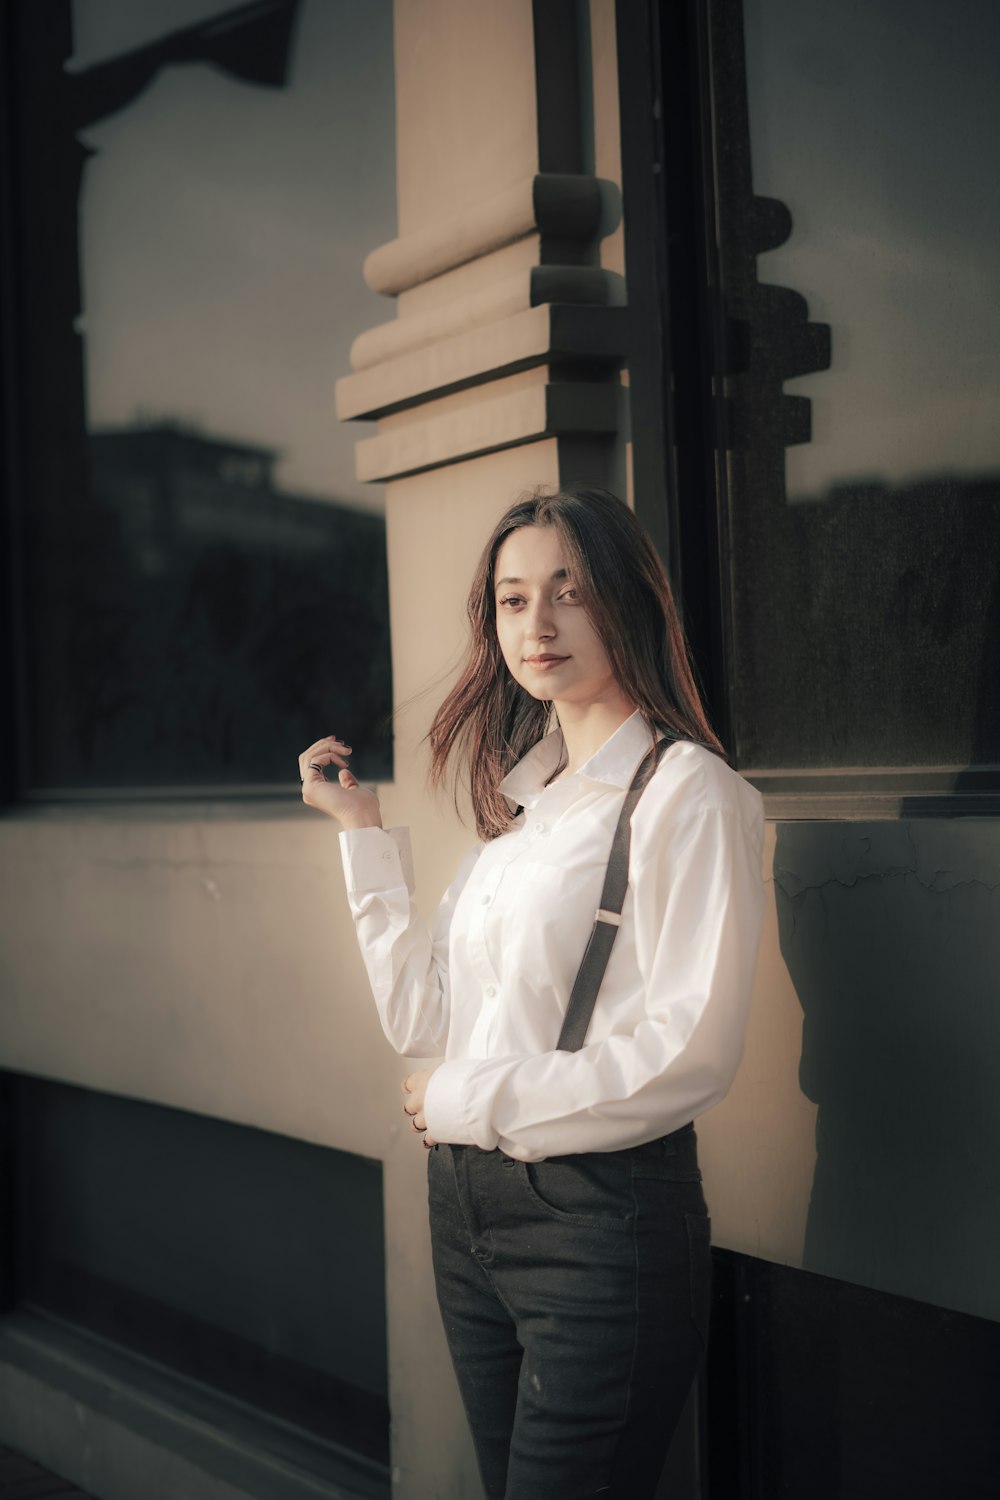 a woman in a white shirt and black tie